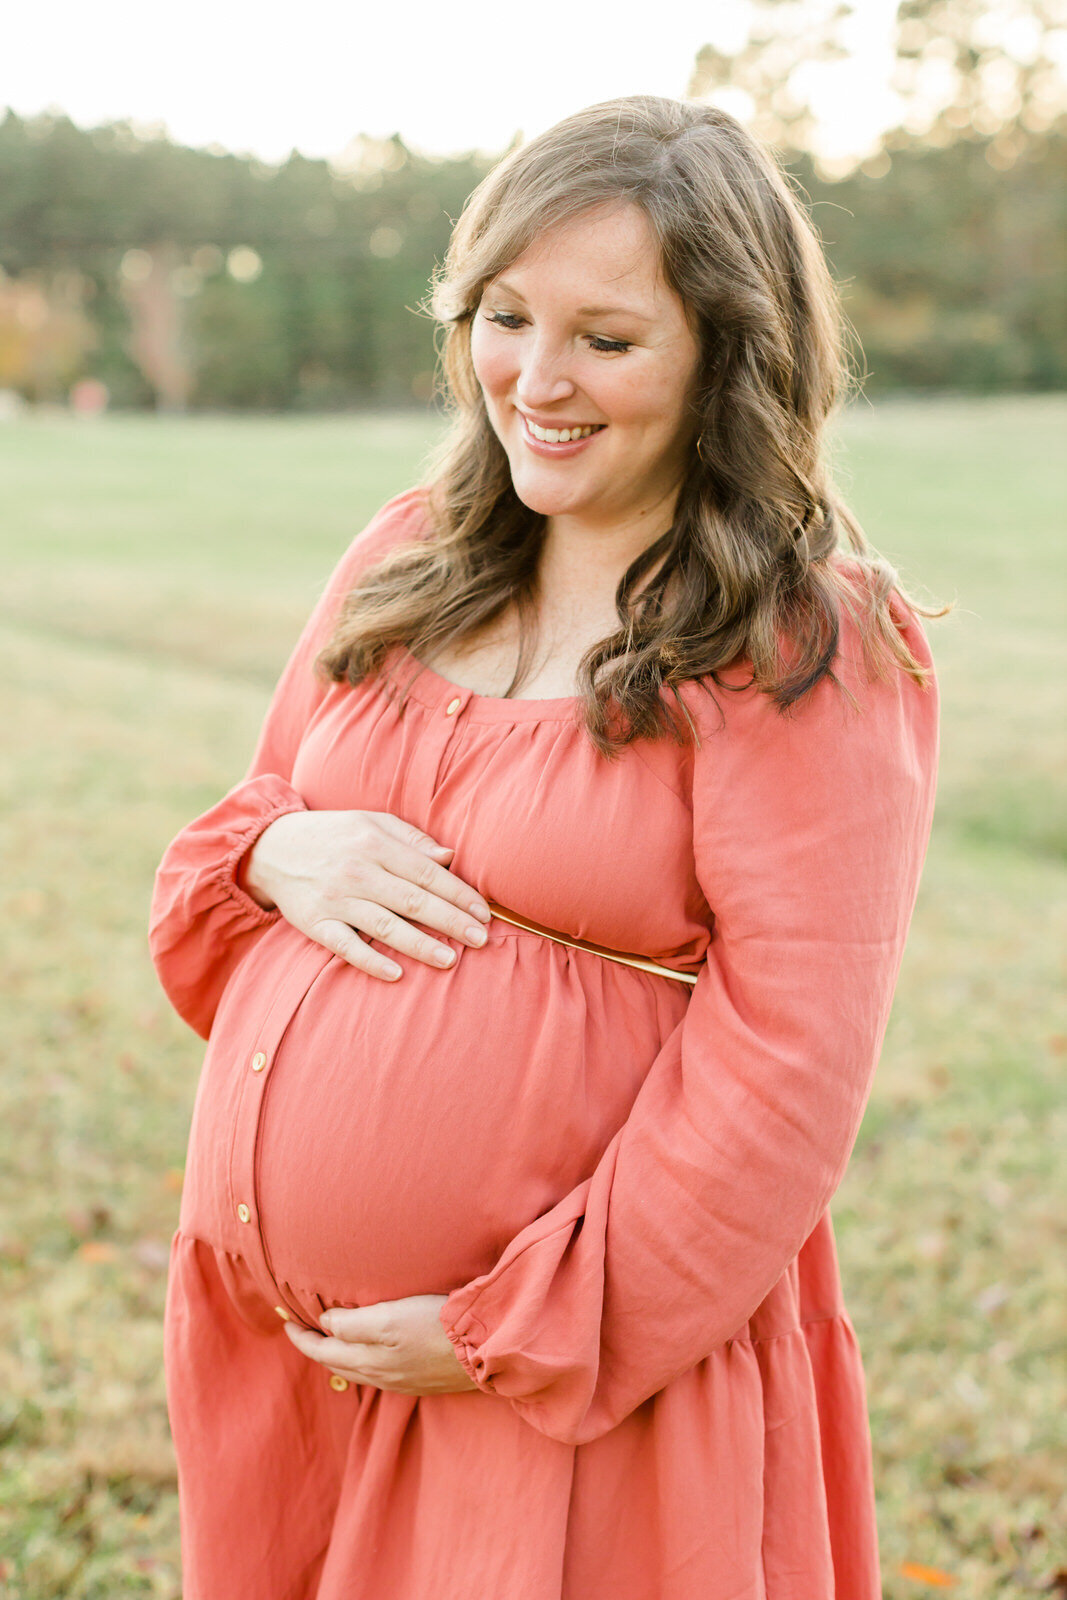 Mom cradles baby bump and smiles down at bump during maternity photo session